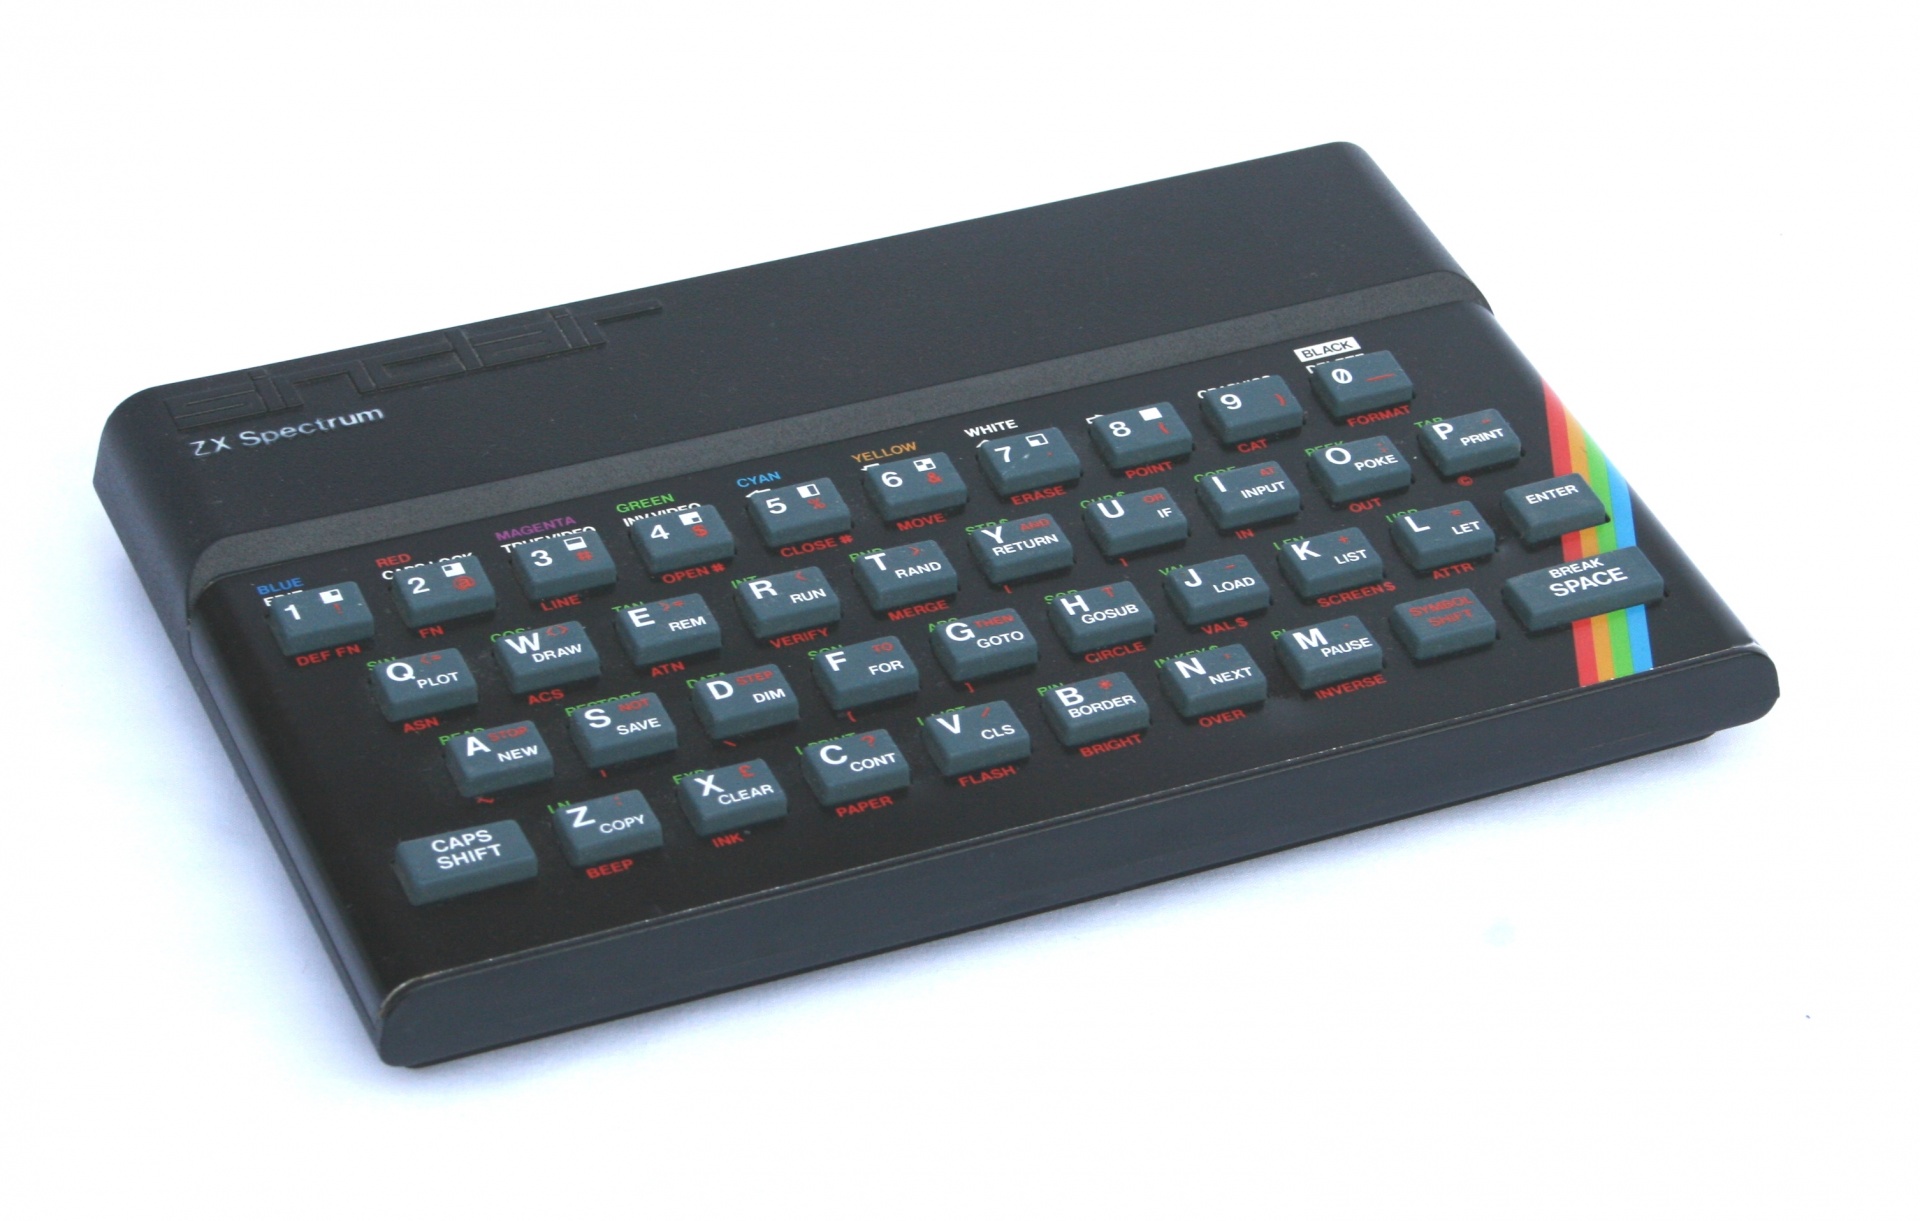 When I was a kid, my dad introduced me to the ZX Spectrum, a BASIC computer that transformed our living room TV into a magical realm of pixels and sou